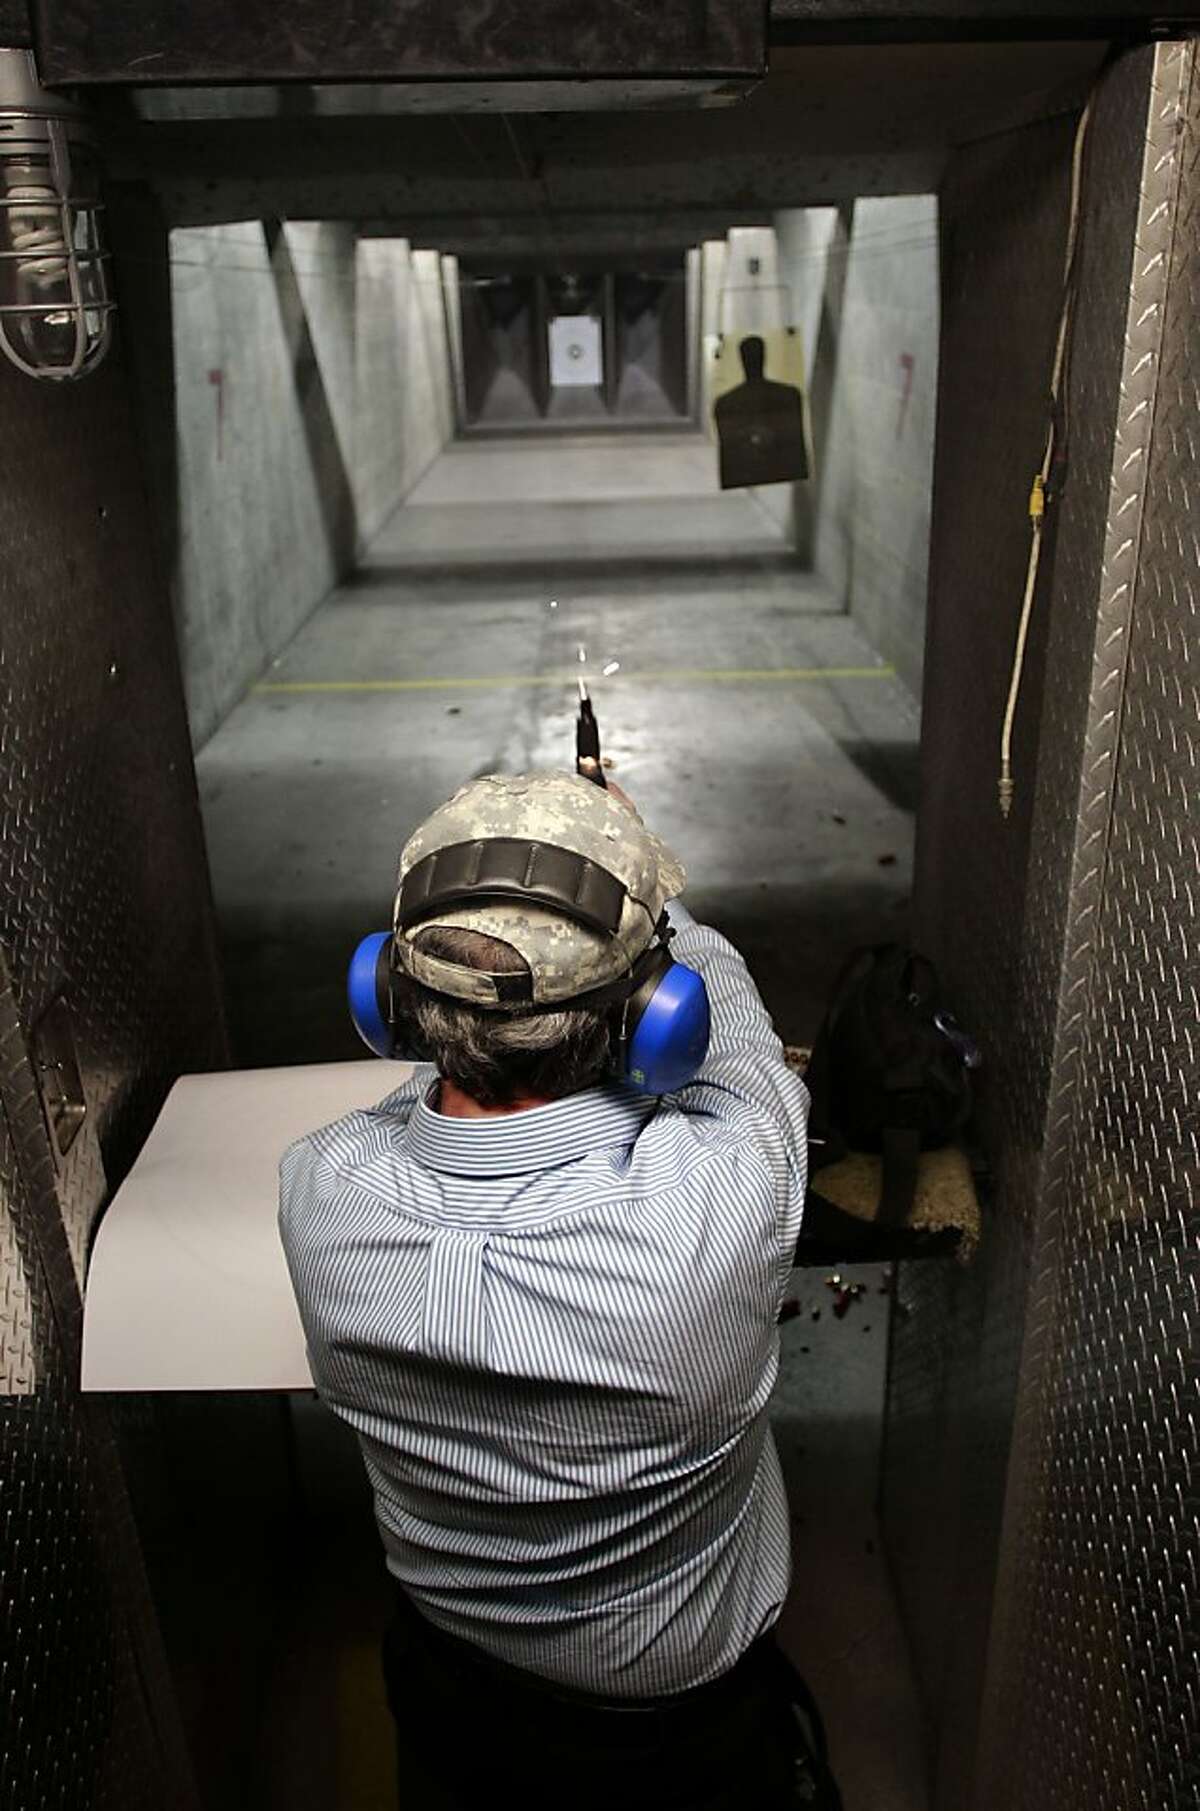 Local gun owner Jeff Levinger, fires his 9mm pistol while taking target practice at the Jackson Arms shooting range in South San Francisco.